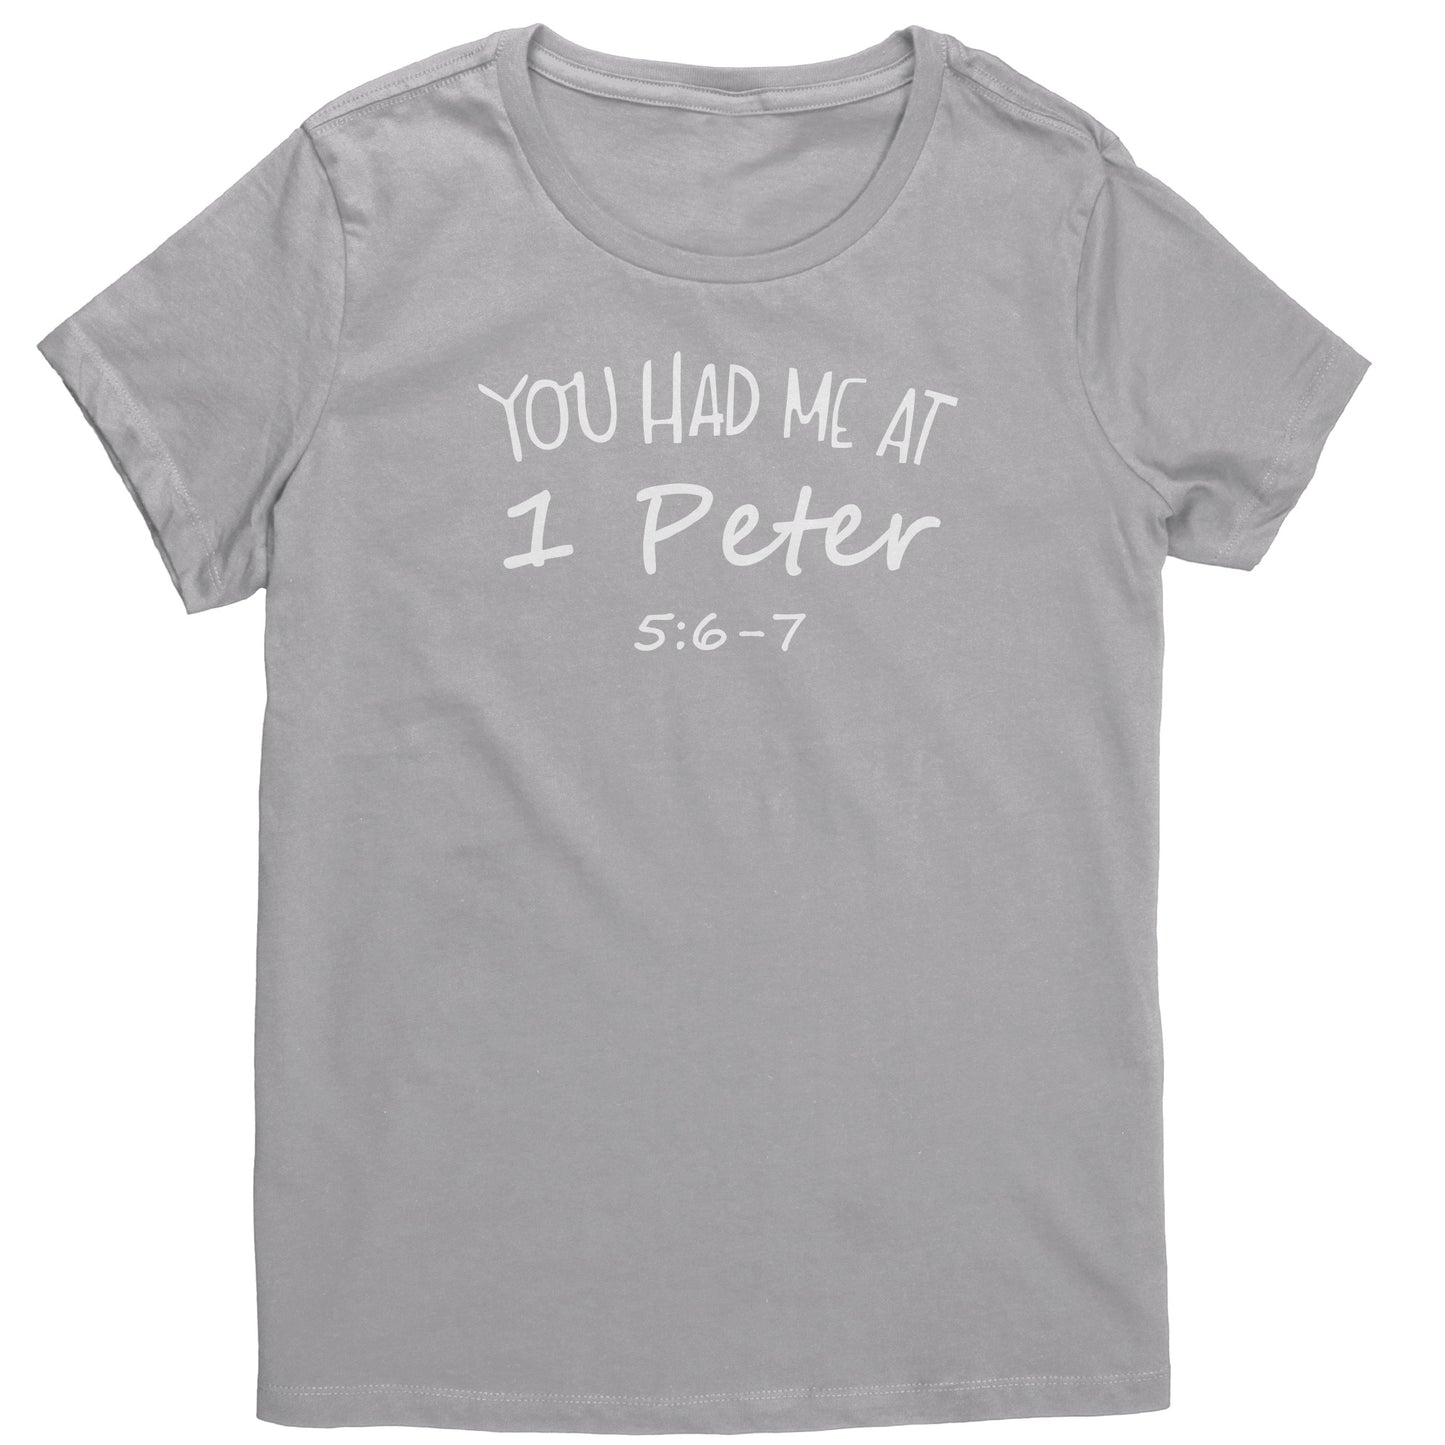 You Had Me At 1 Peter 5:6-7 Women's T-Shirt Part 2